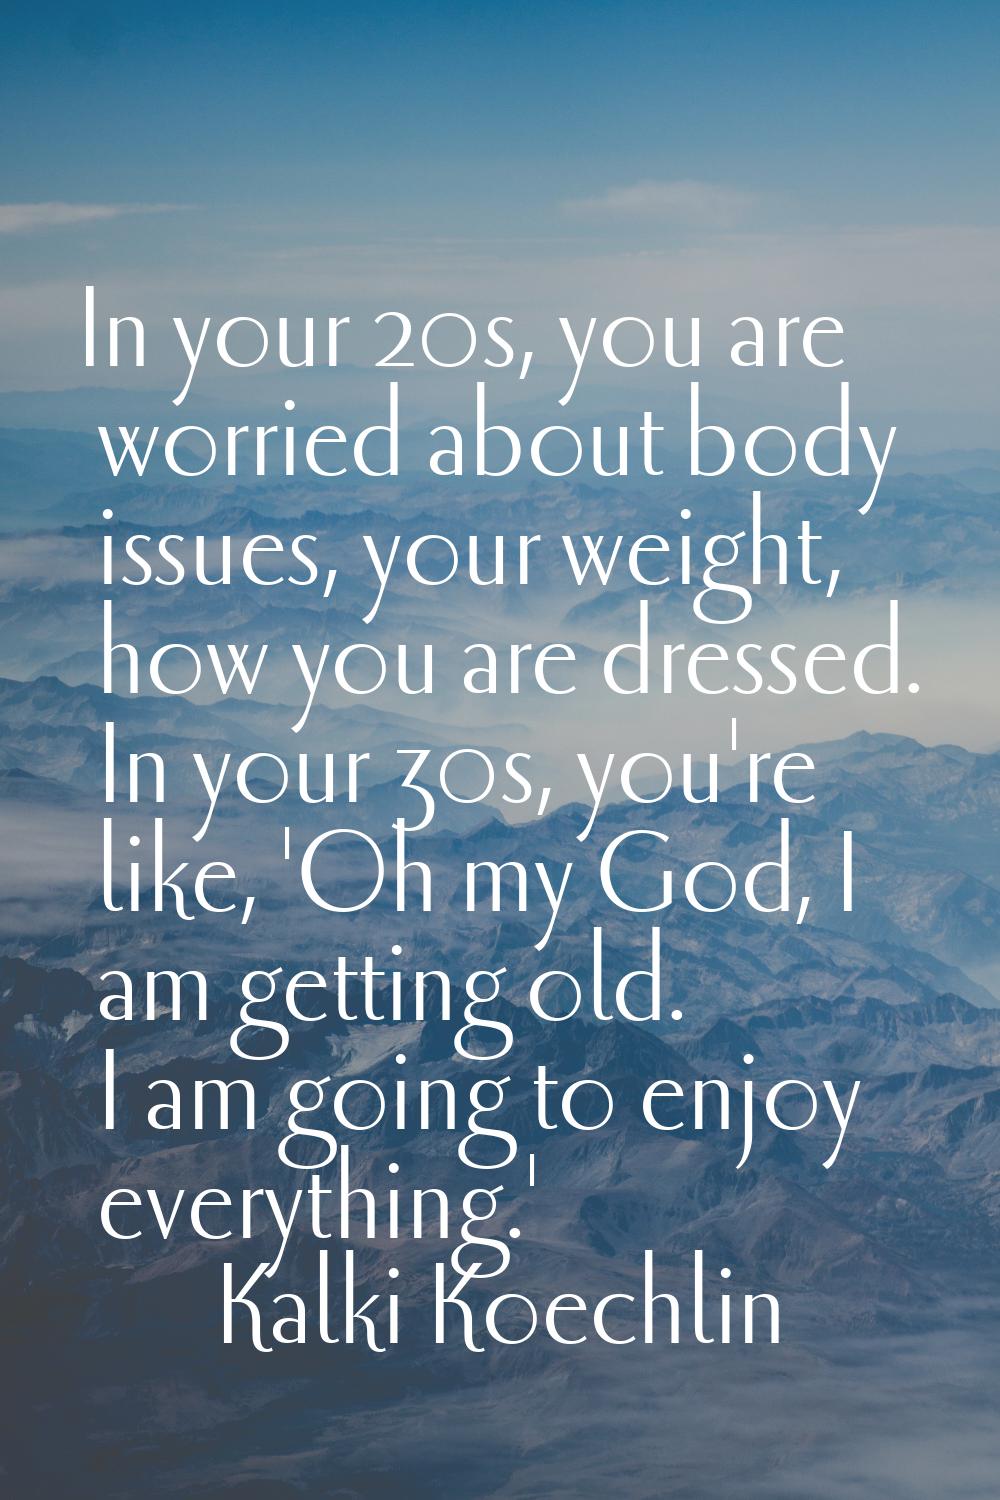 In your 20s, you are worried about body issues, your weight, how you are dressed. In your 30s, you'